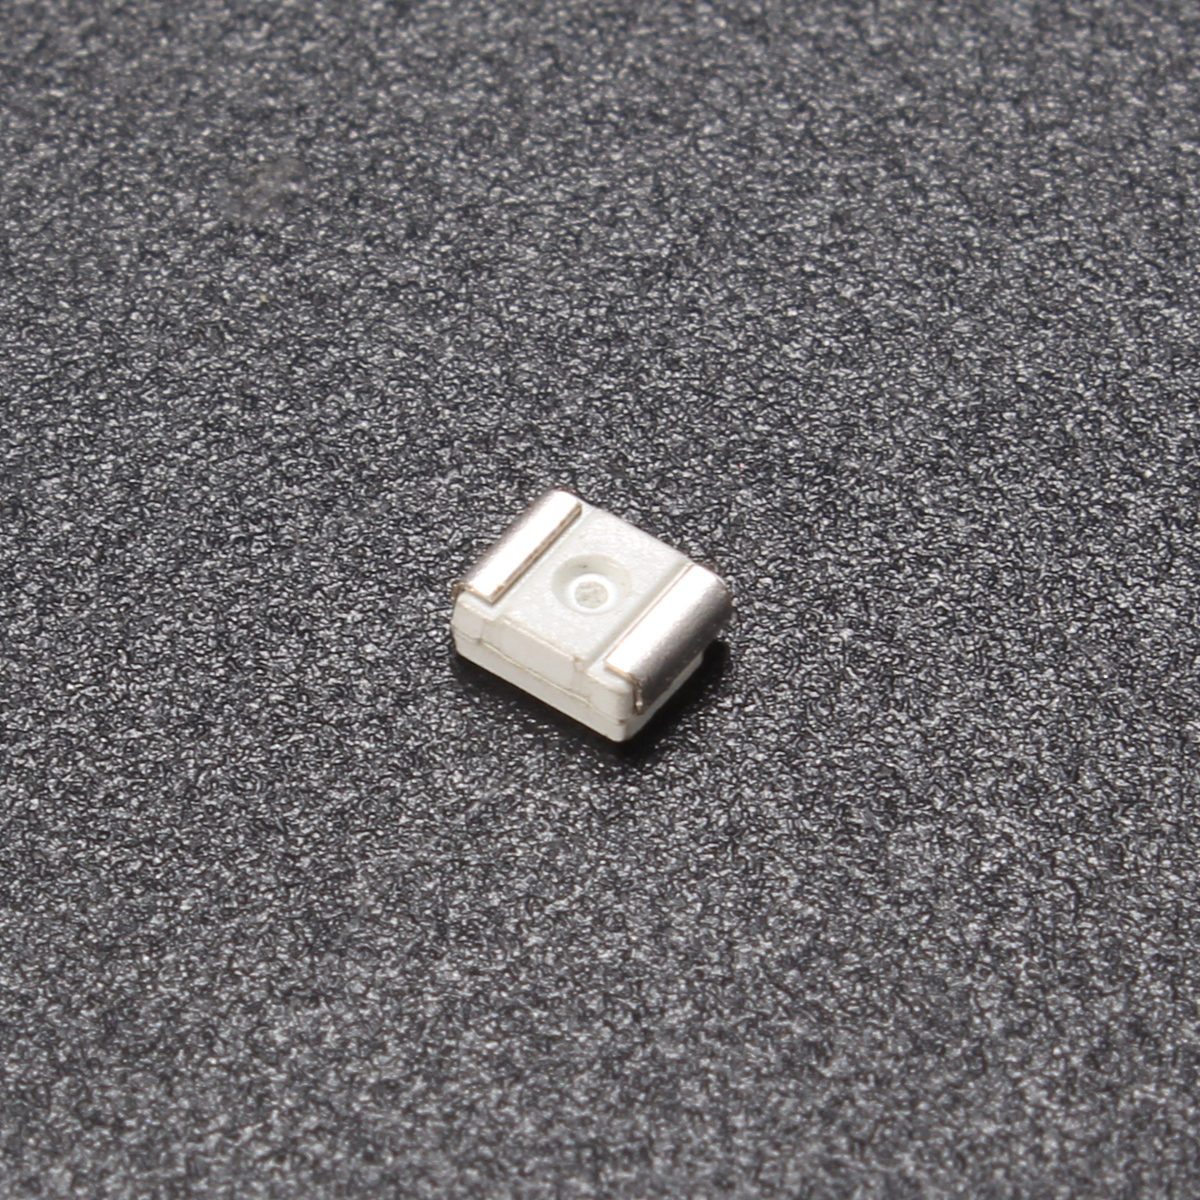 100PCS-SMD3528-1210-1W-100LM-Warm-White-LED-Backlight-DIY-Chip-Bead-For-TV-Application-1128676-4